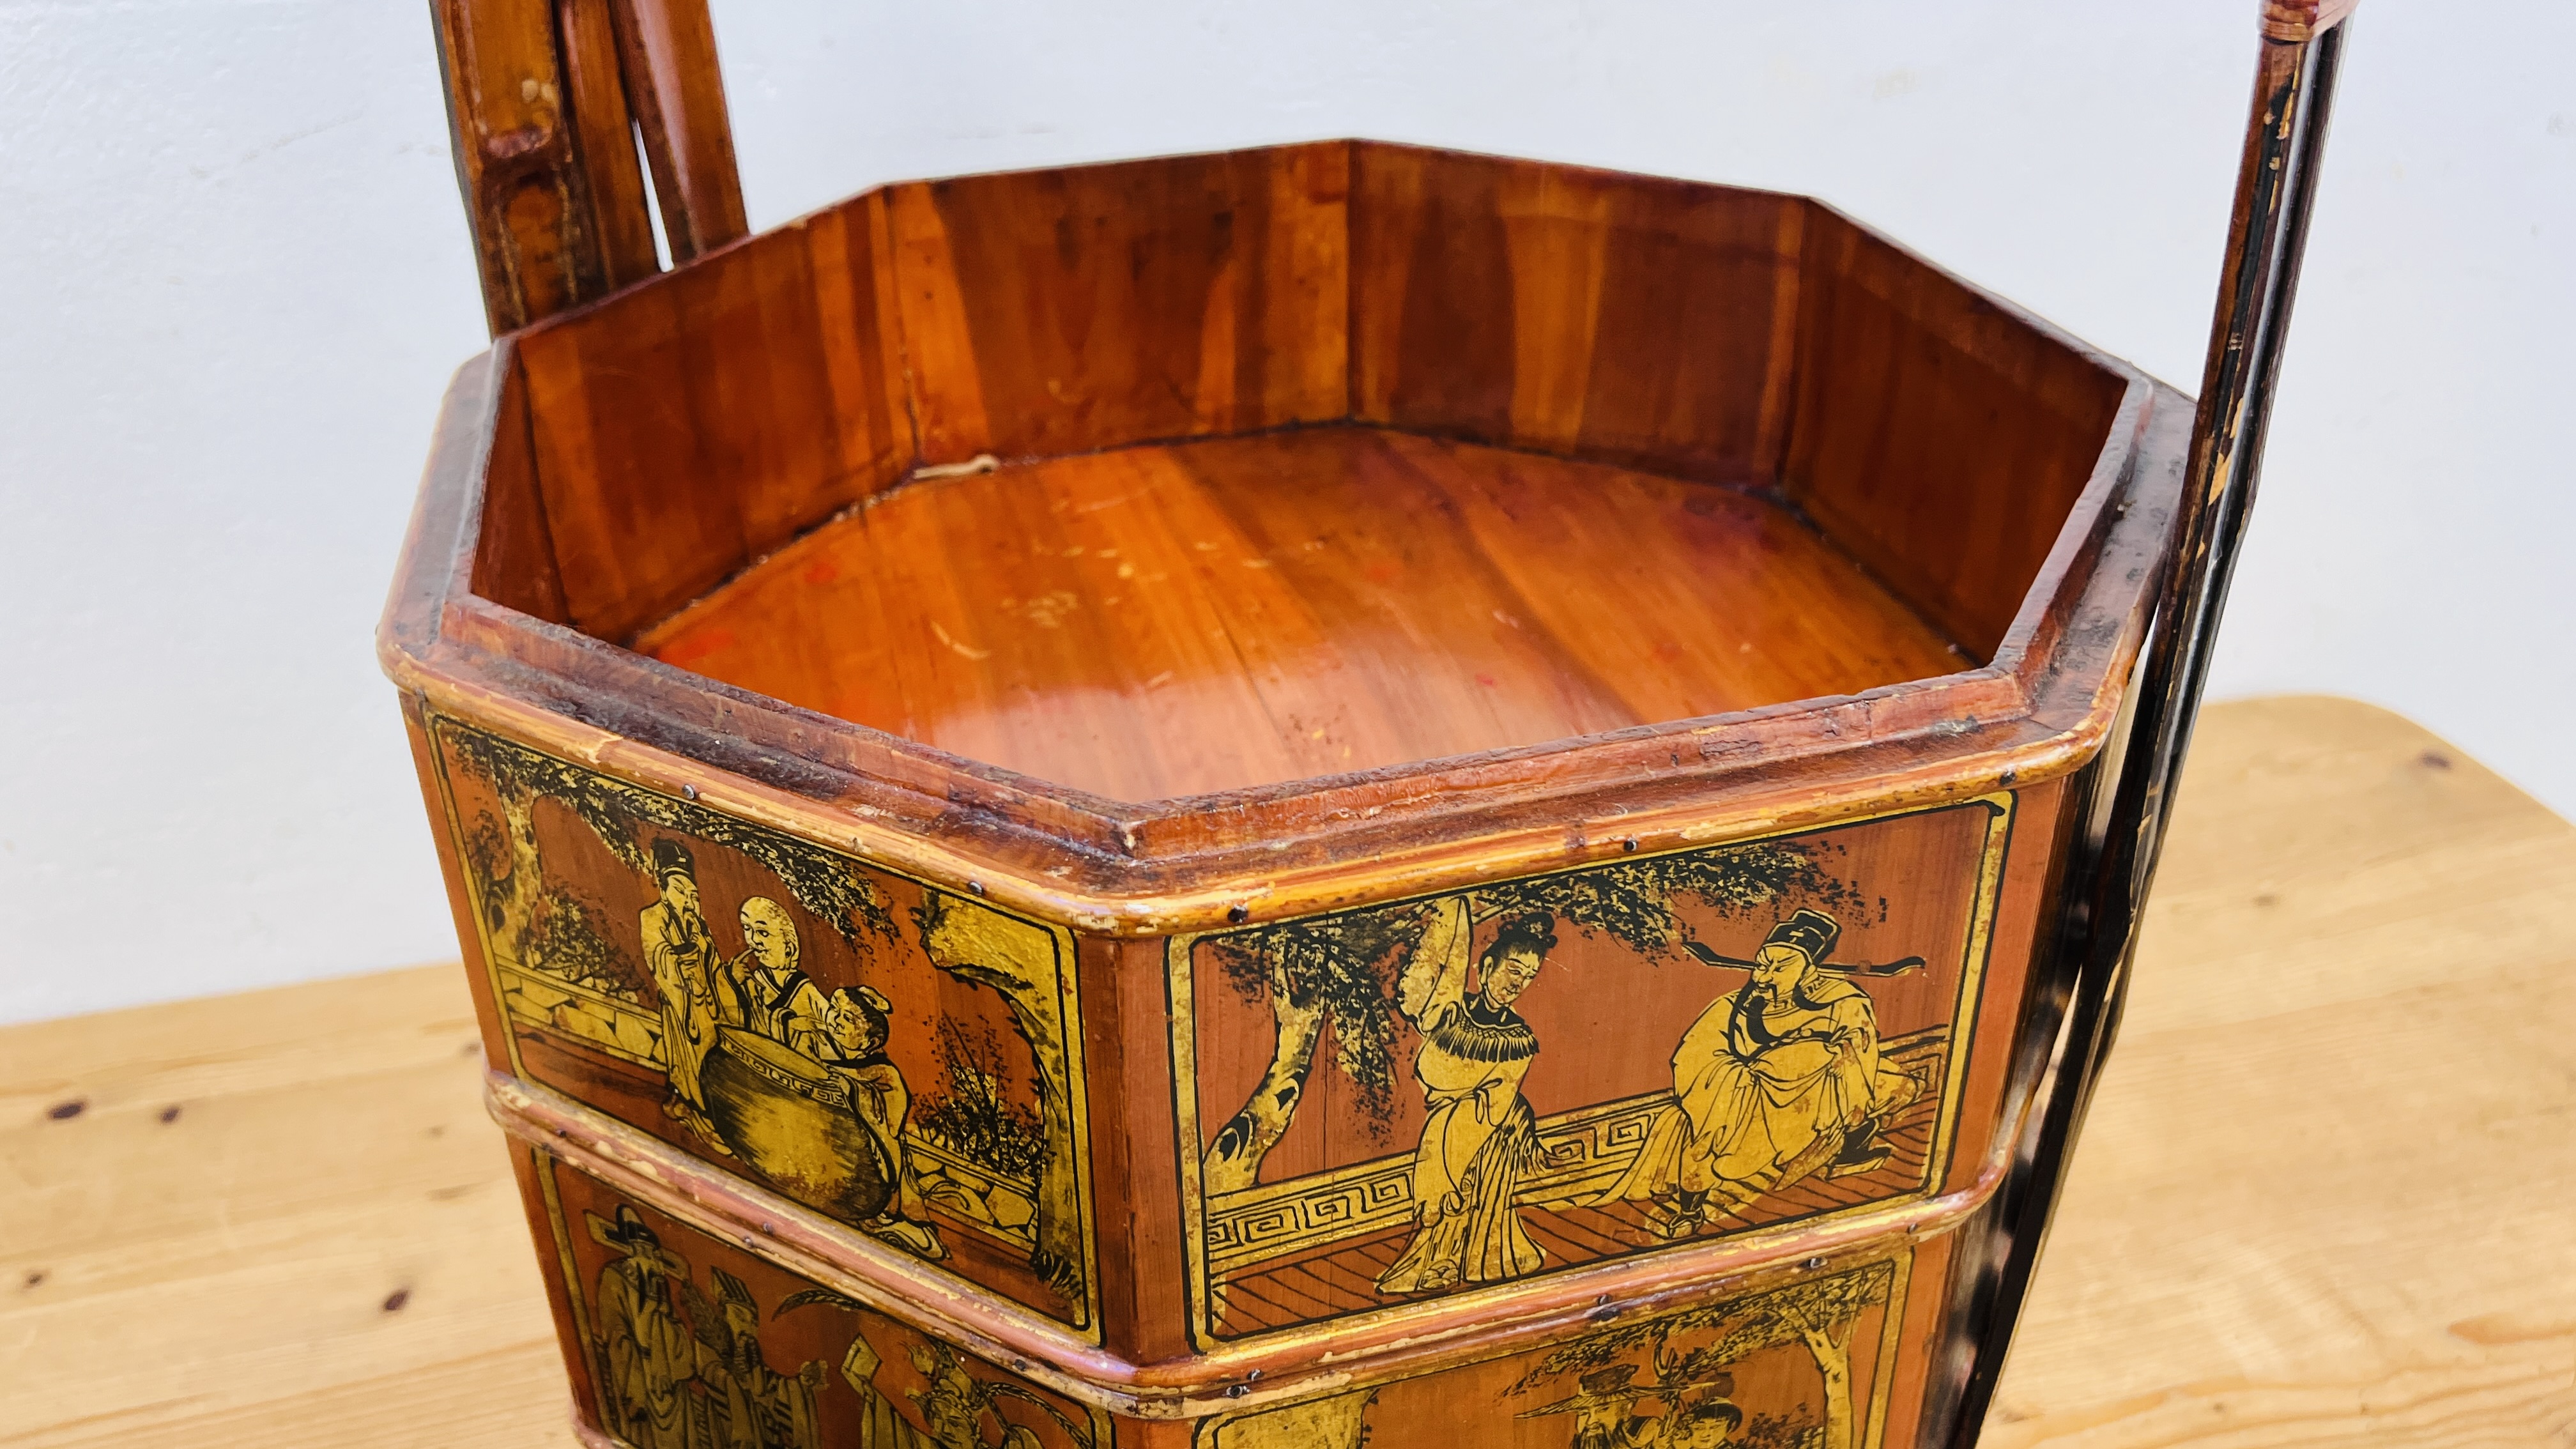 A HIGHLY DECORATIVE GILT DECORATED AND LACQUERED CHINESE WEDDING BASKET - HEIGHT 62CM. - Image 10 of 12